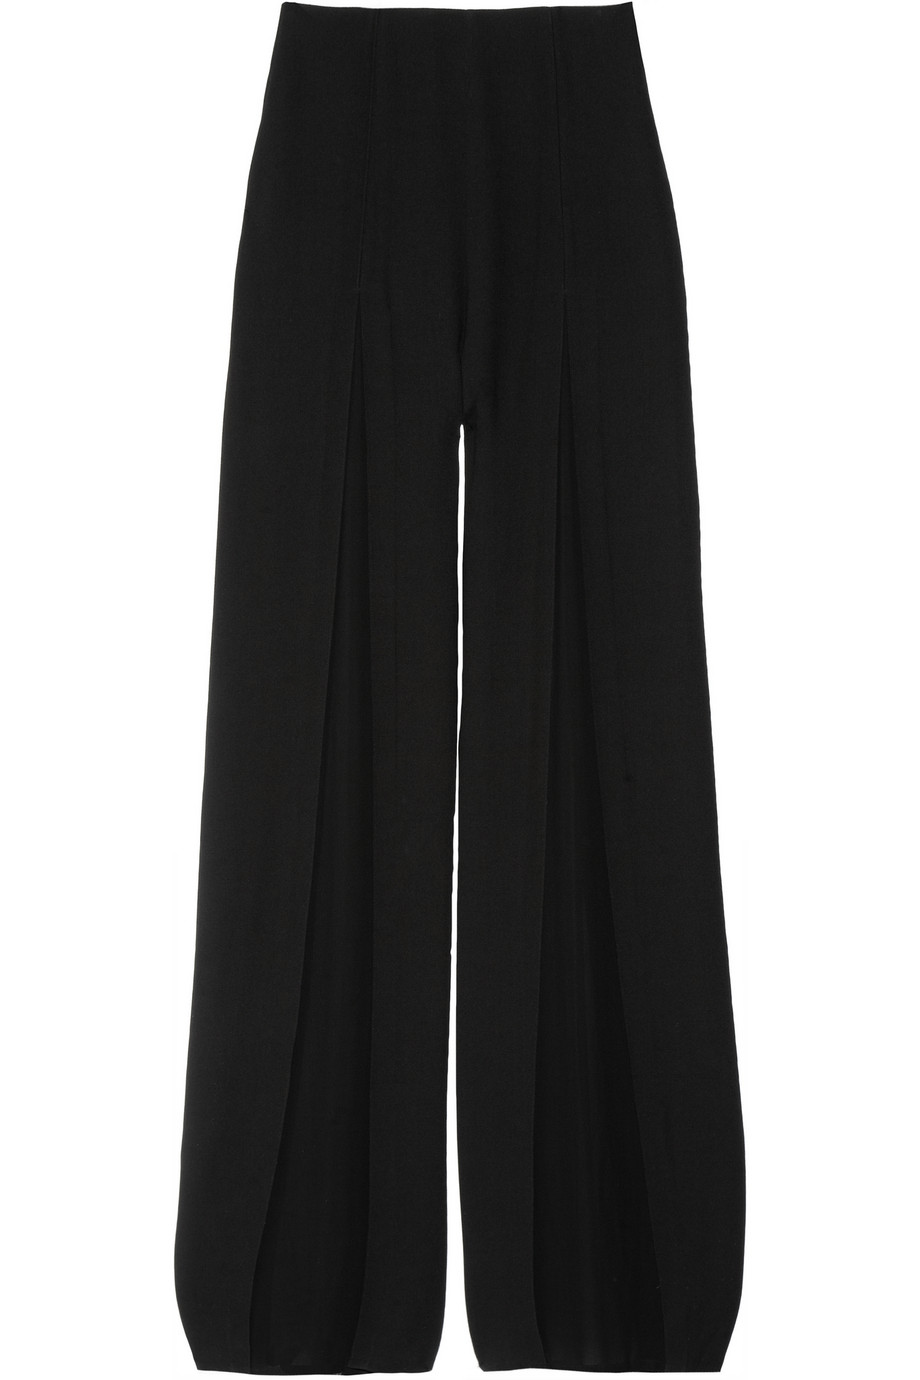 Lyst Sass And Bide As Light As Air Crepe Palazzo Pants In Black